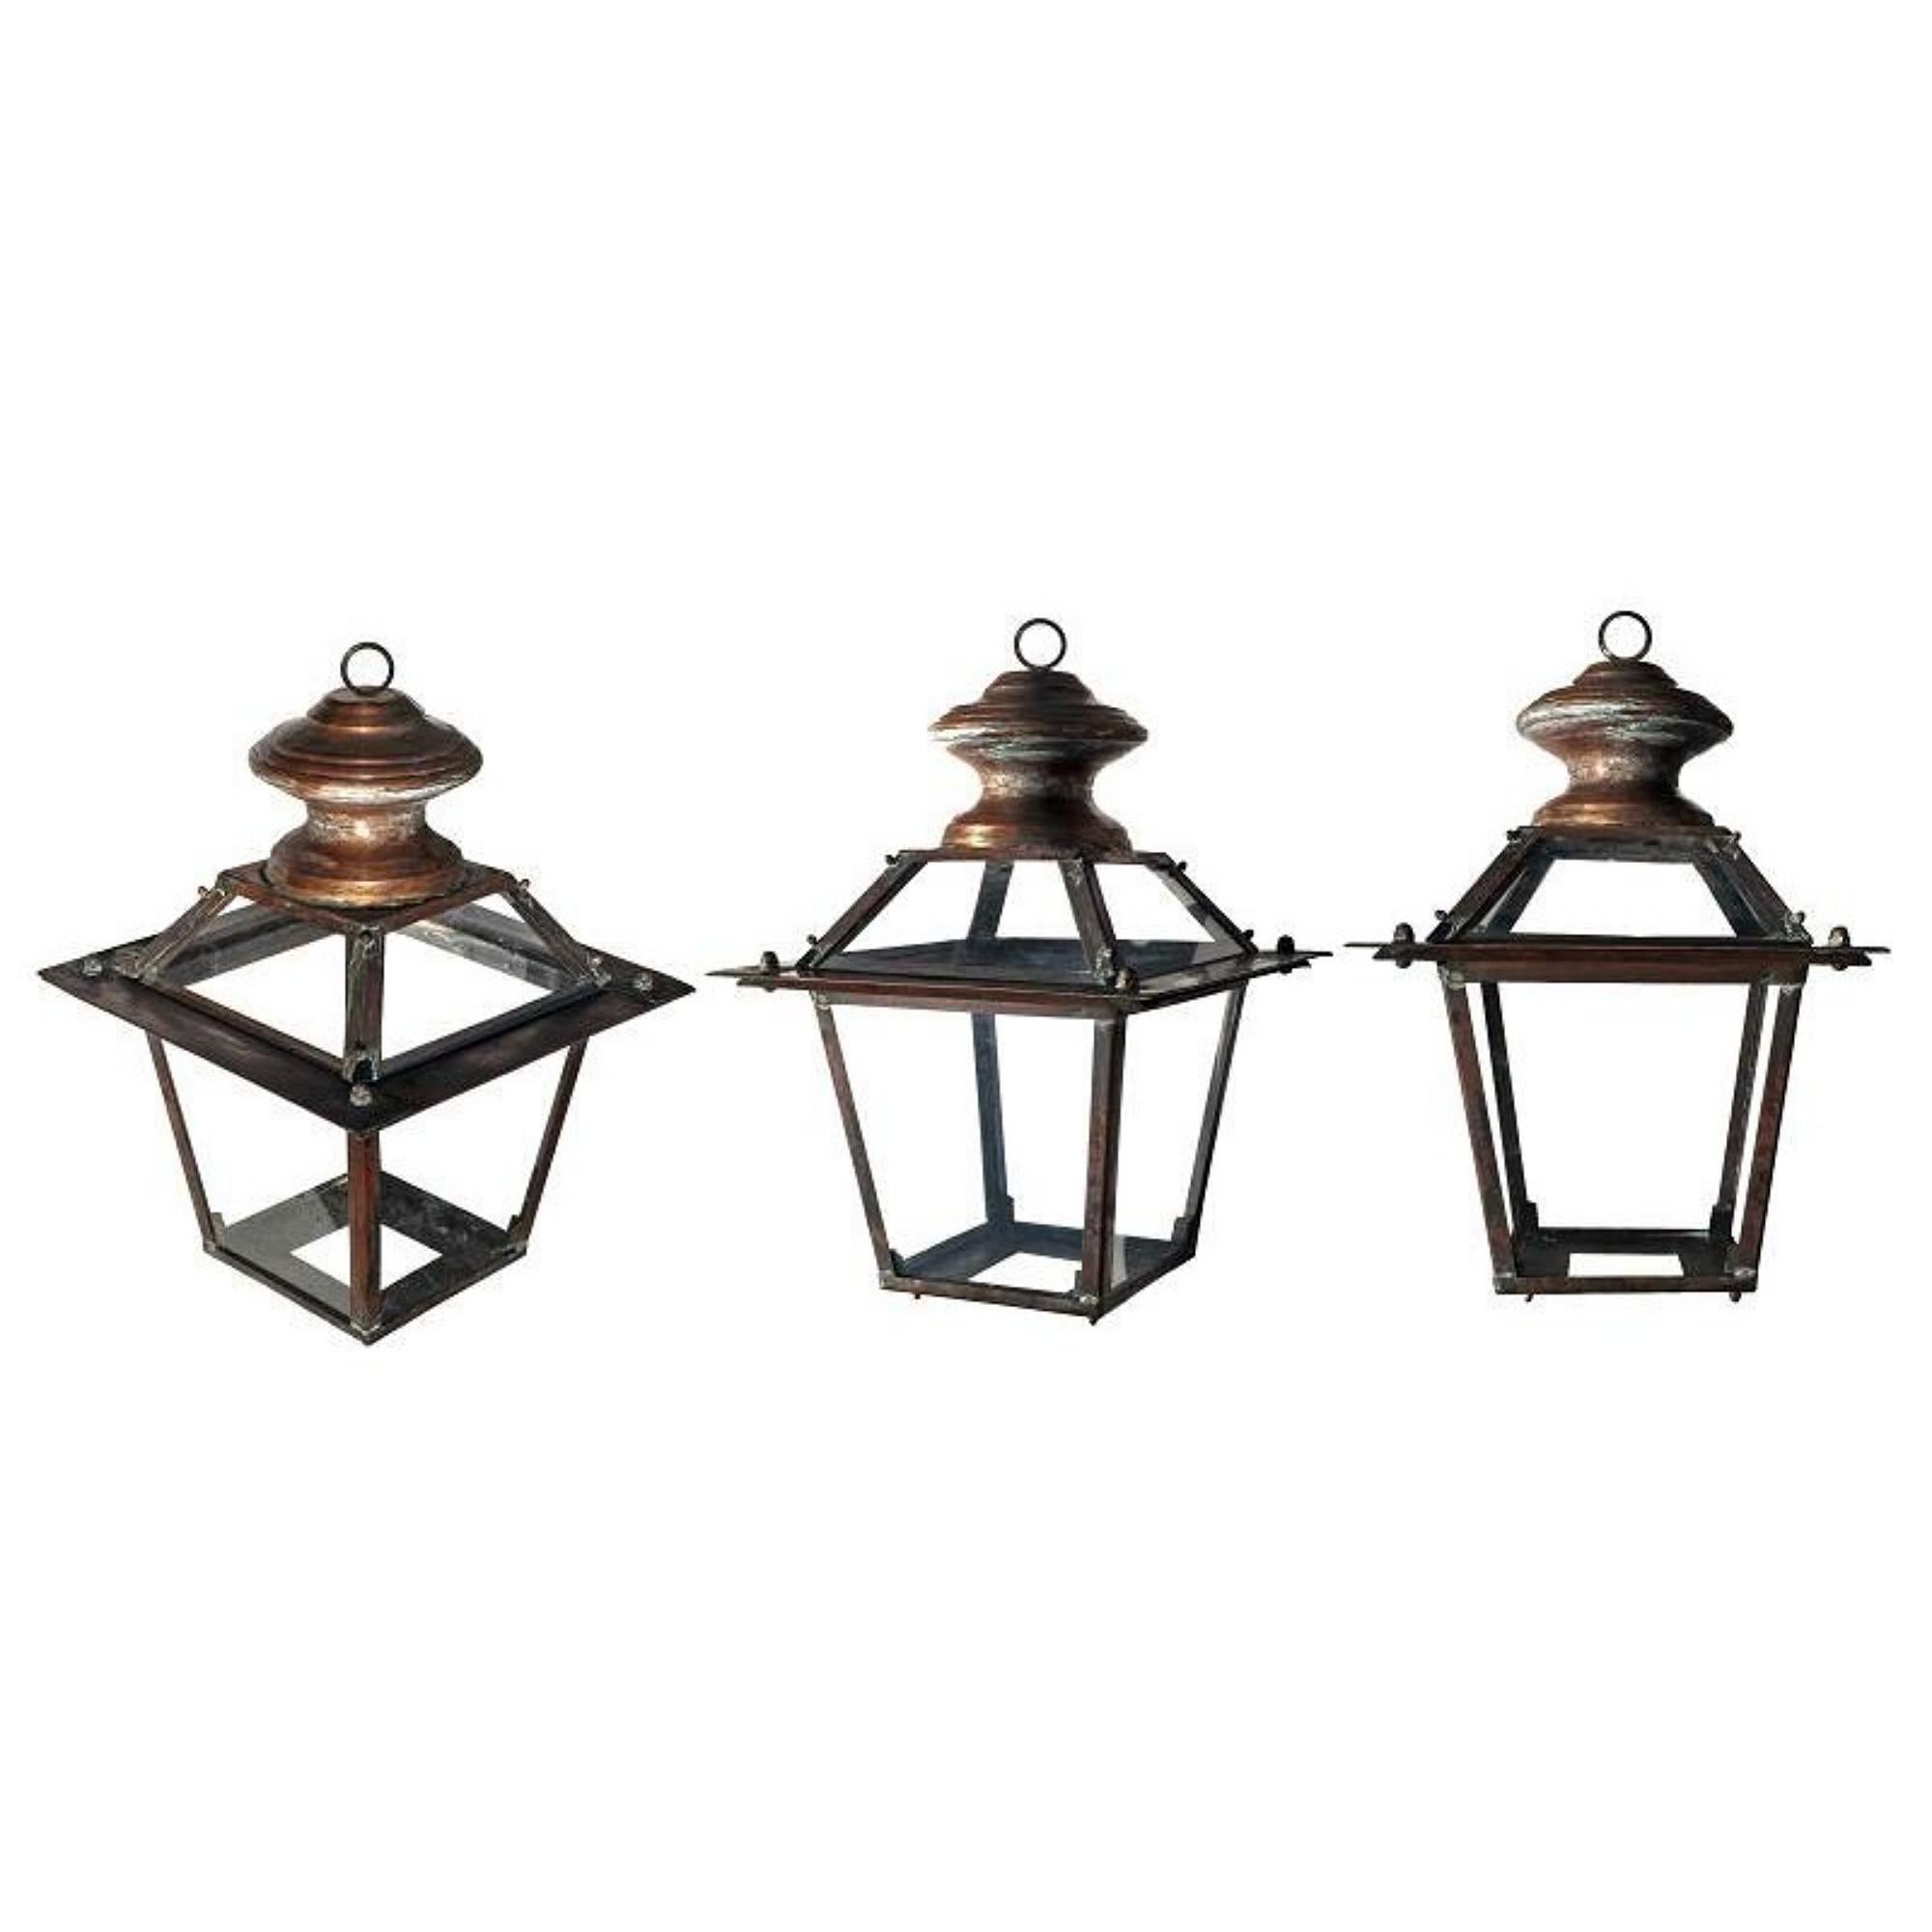 Pair of Italian lanterns in tuscan copper with ring early 20th century.
Early 20th century.
These are handcrafted lanterns, hand made, absolutely not comparable with the classic imported lanterns produced in series.
Made from a 10/10 thick copper